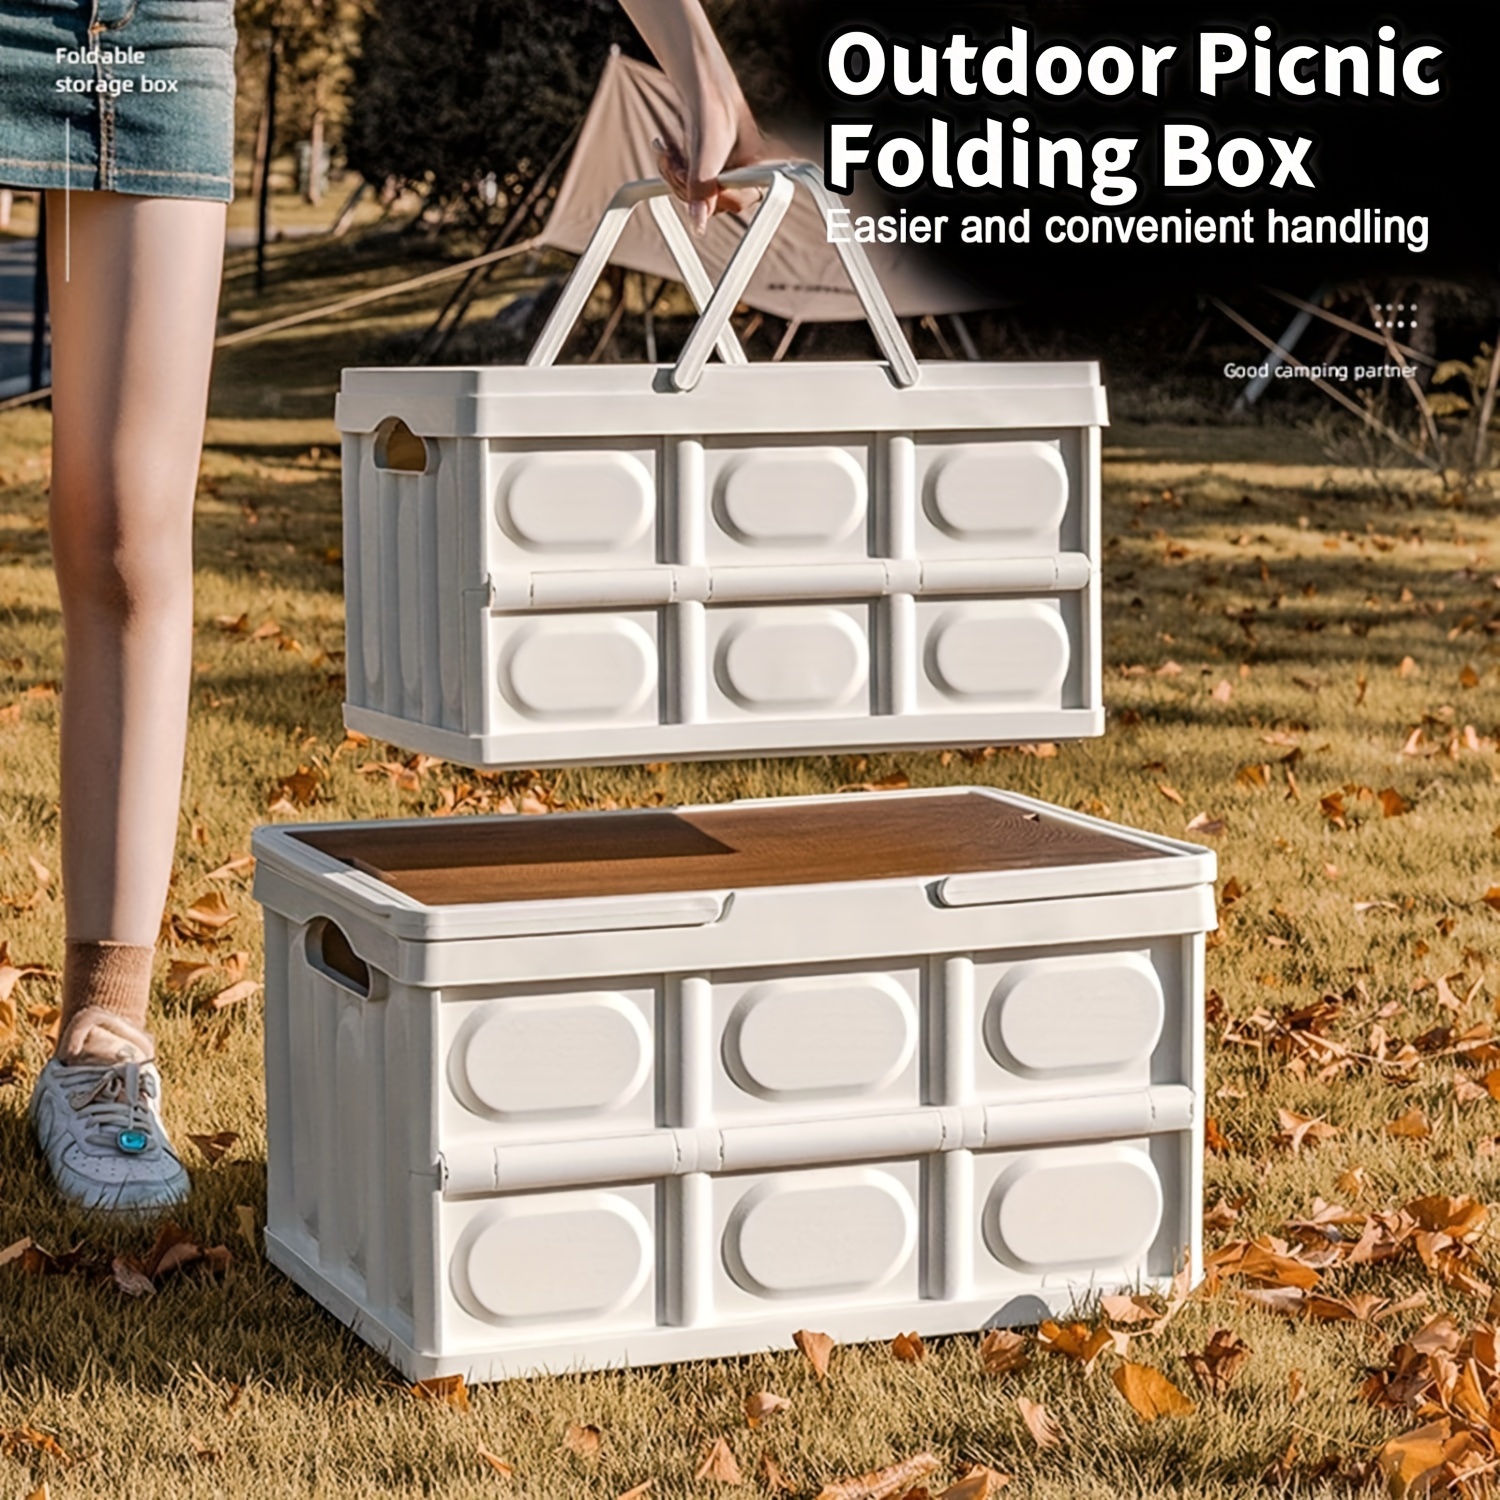 

Versatile Outdoor Camping Storage Box With Wooden Lid - Foldable, Perfect For Picnics & Car Trunk Organization Outdoor Storage Box Deck Box For Outdoor Storage